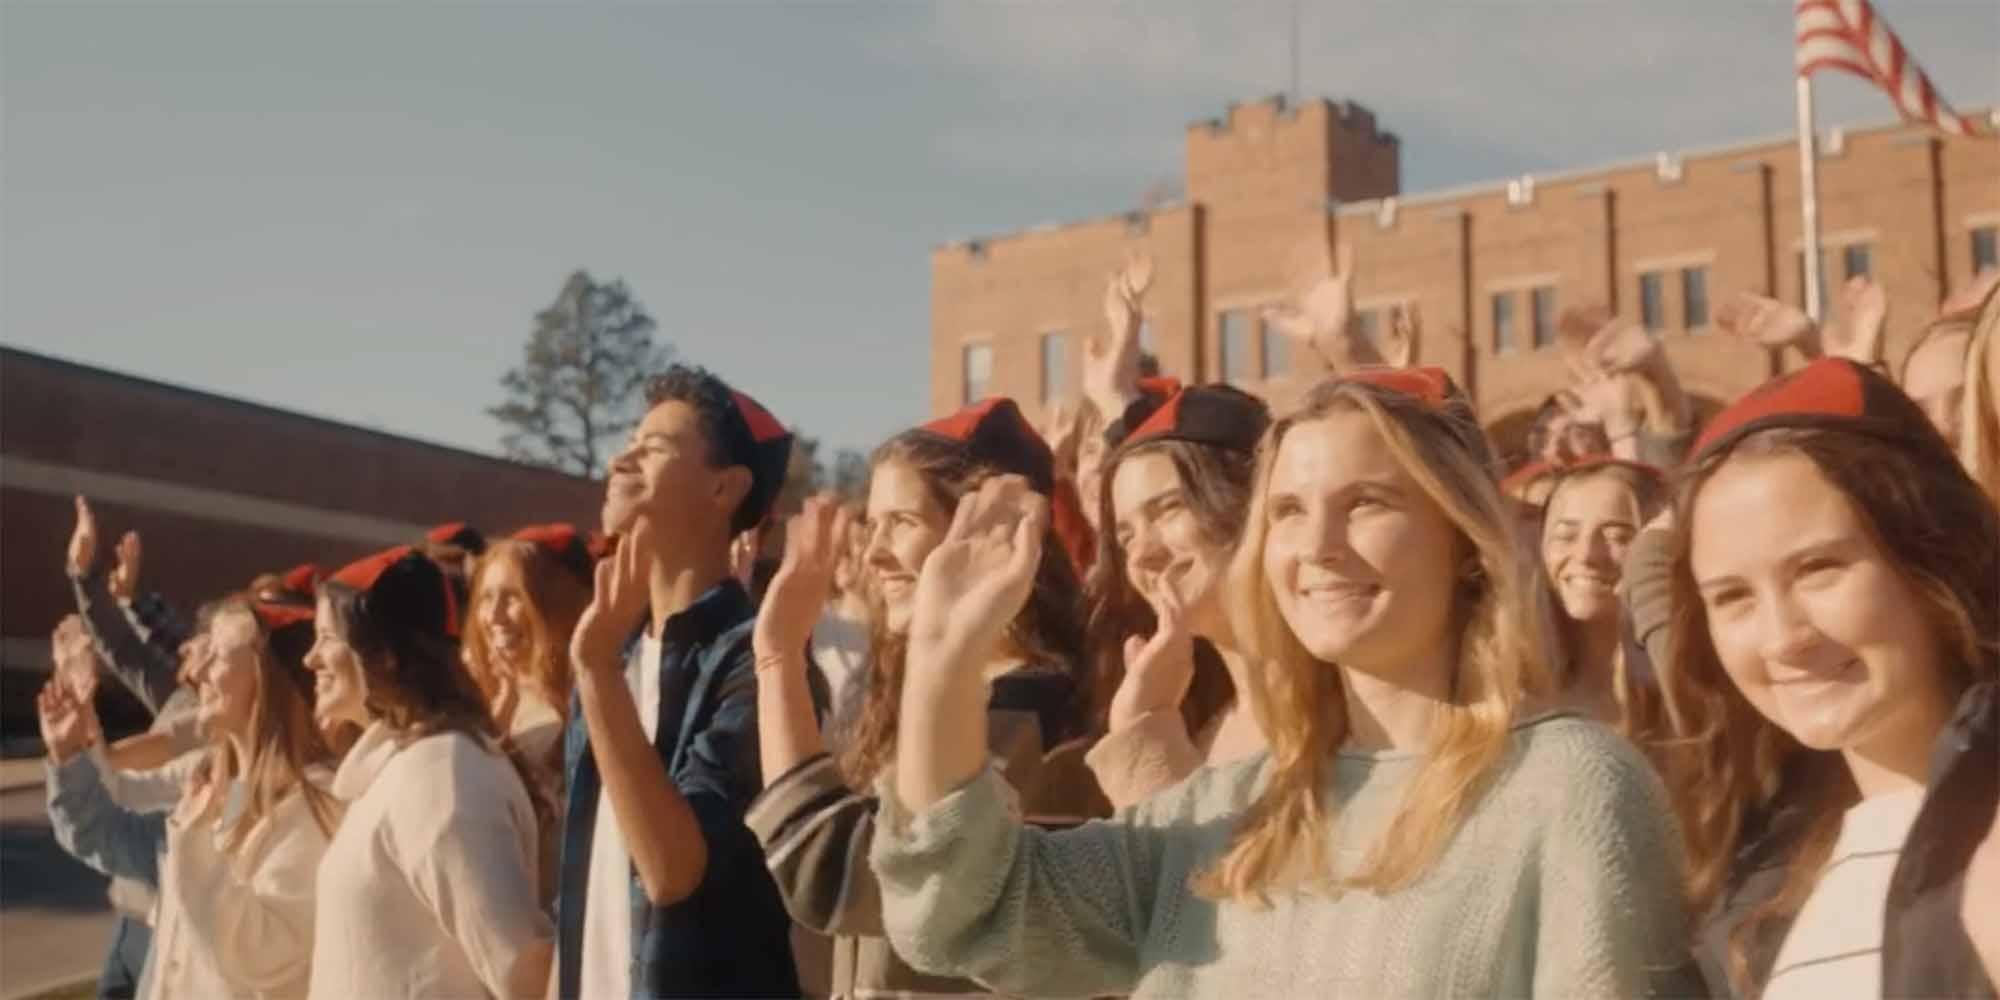 Students in beanies waving